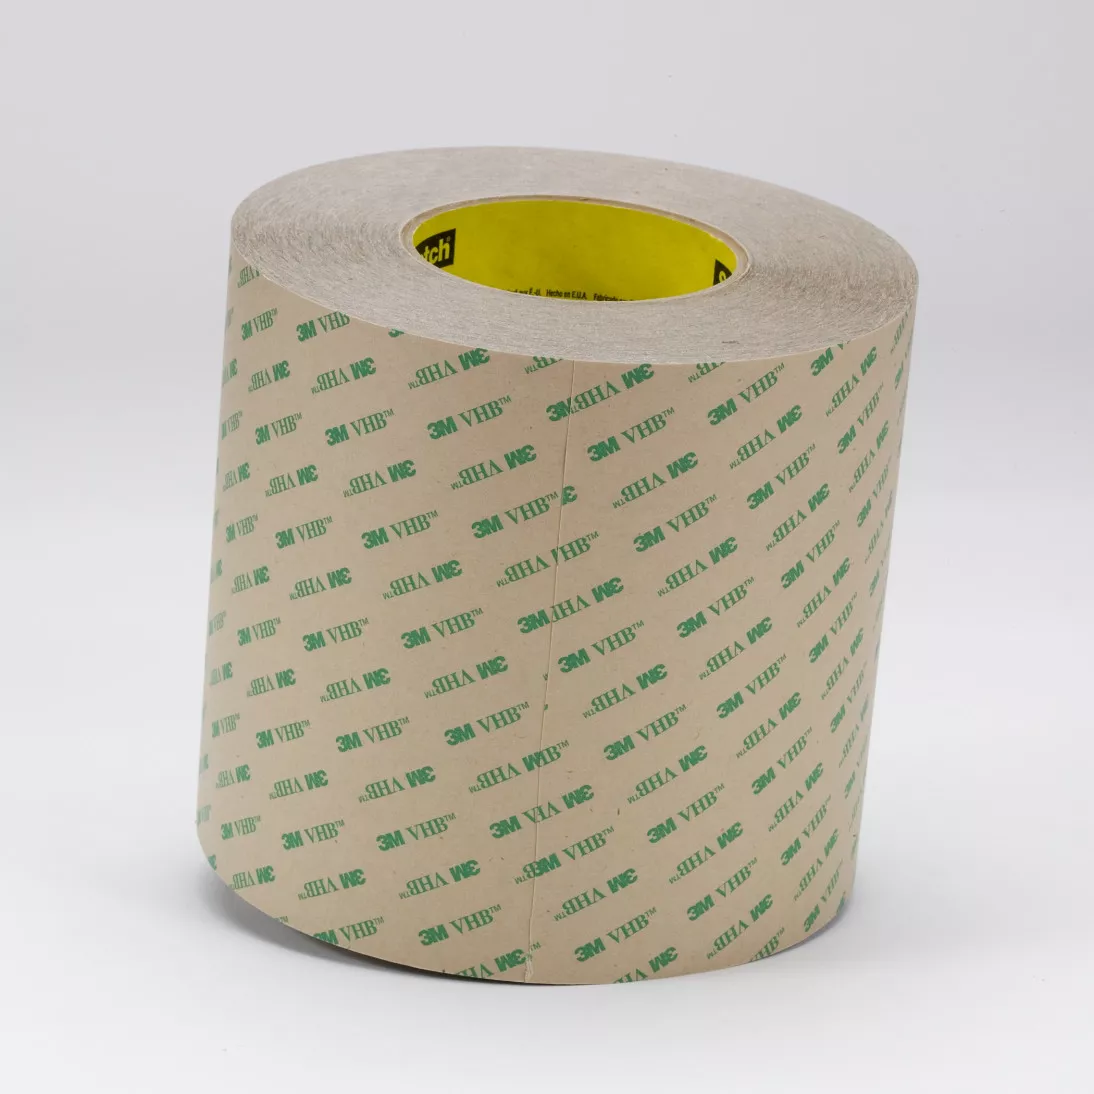 3M™ VHB™ Adhesive Transfer Tape F9473PC, Clear, 3 in x 60 yd, 10 Mil,
3/Case